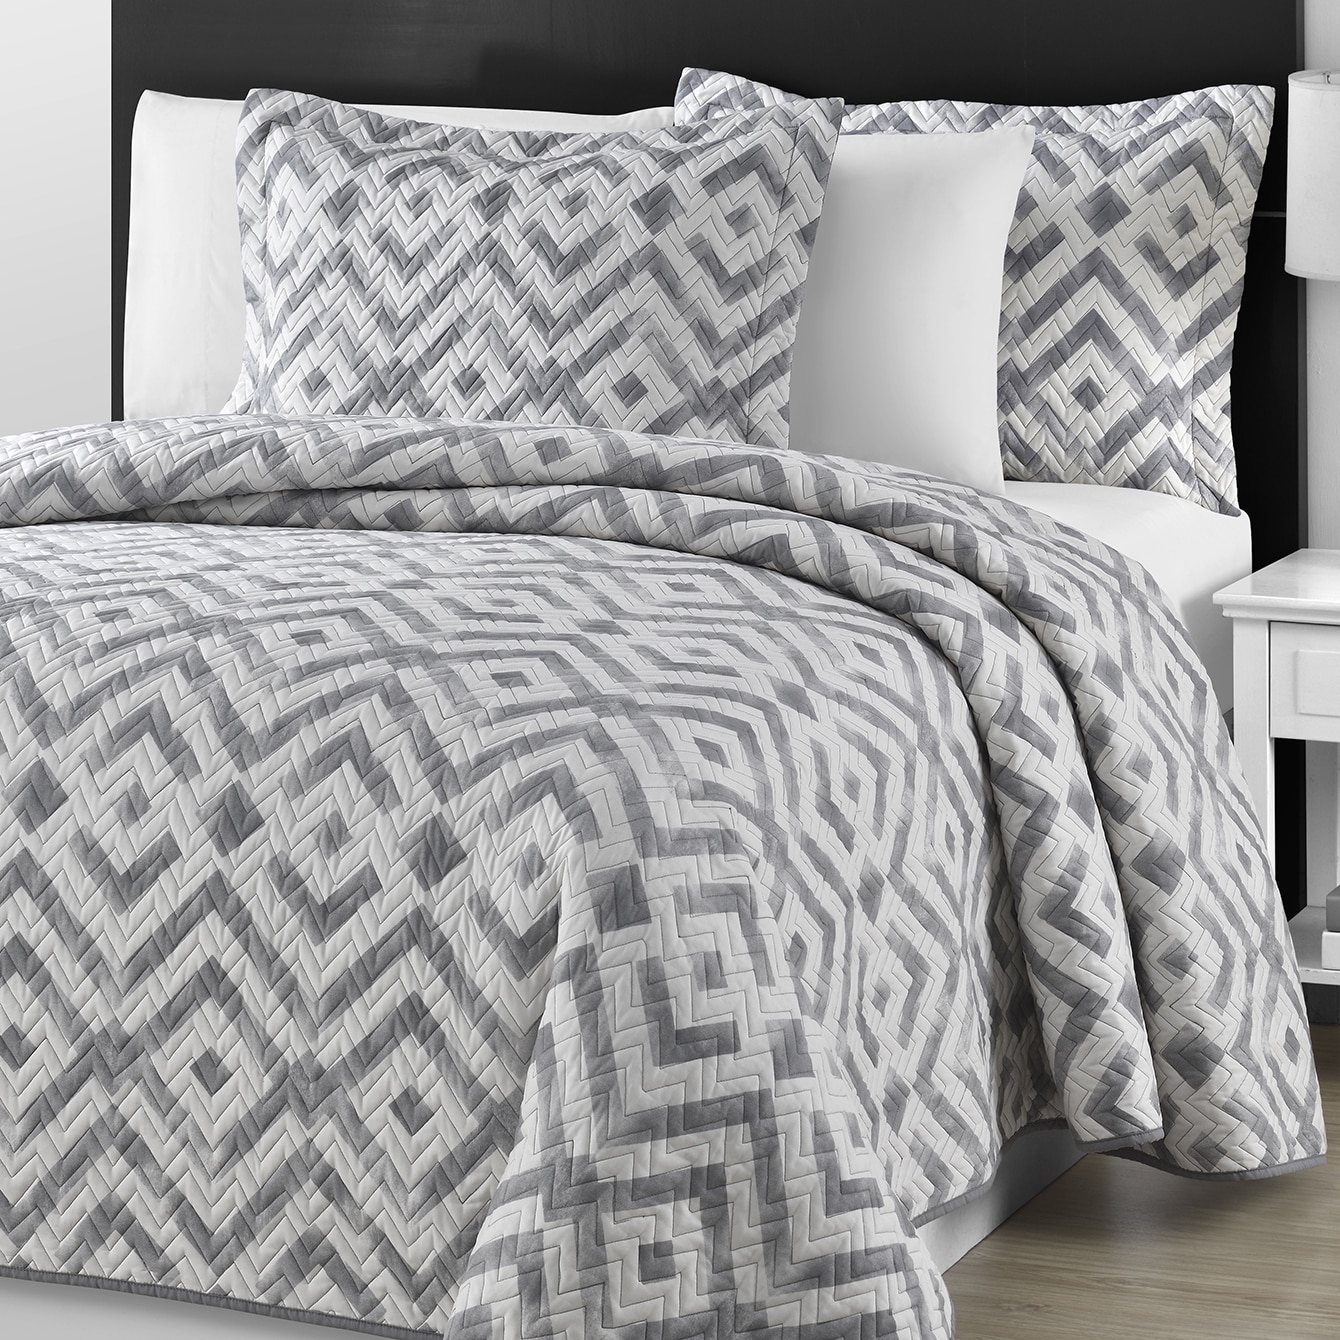 Shop Comfy Bedding Chevron Quilted Gray And Off White 3 Piece